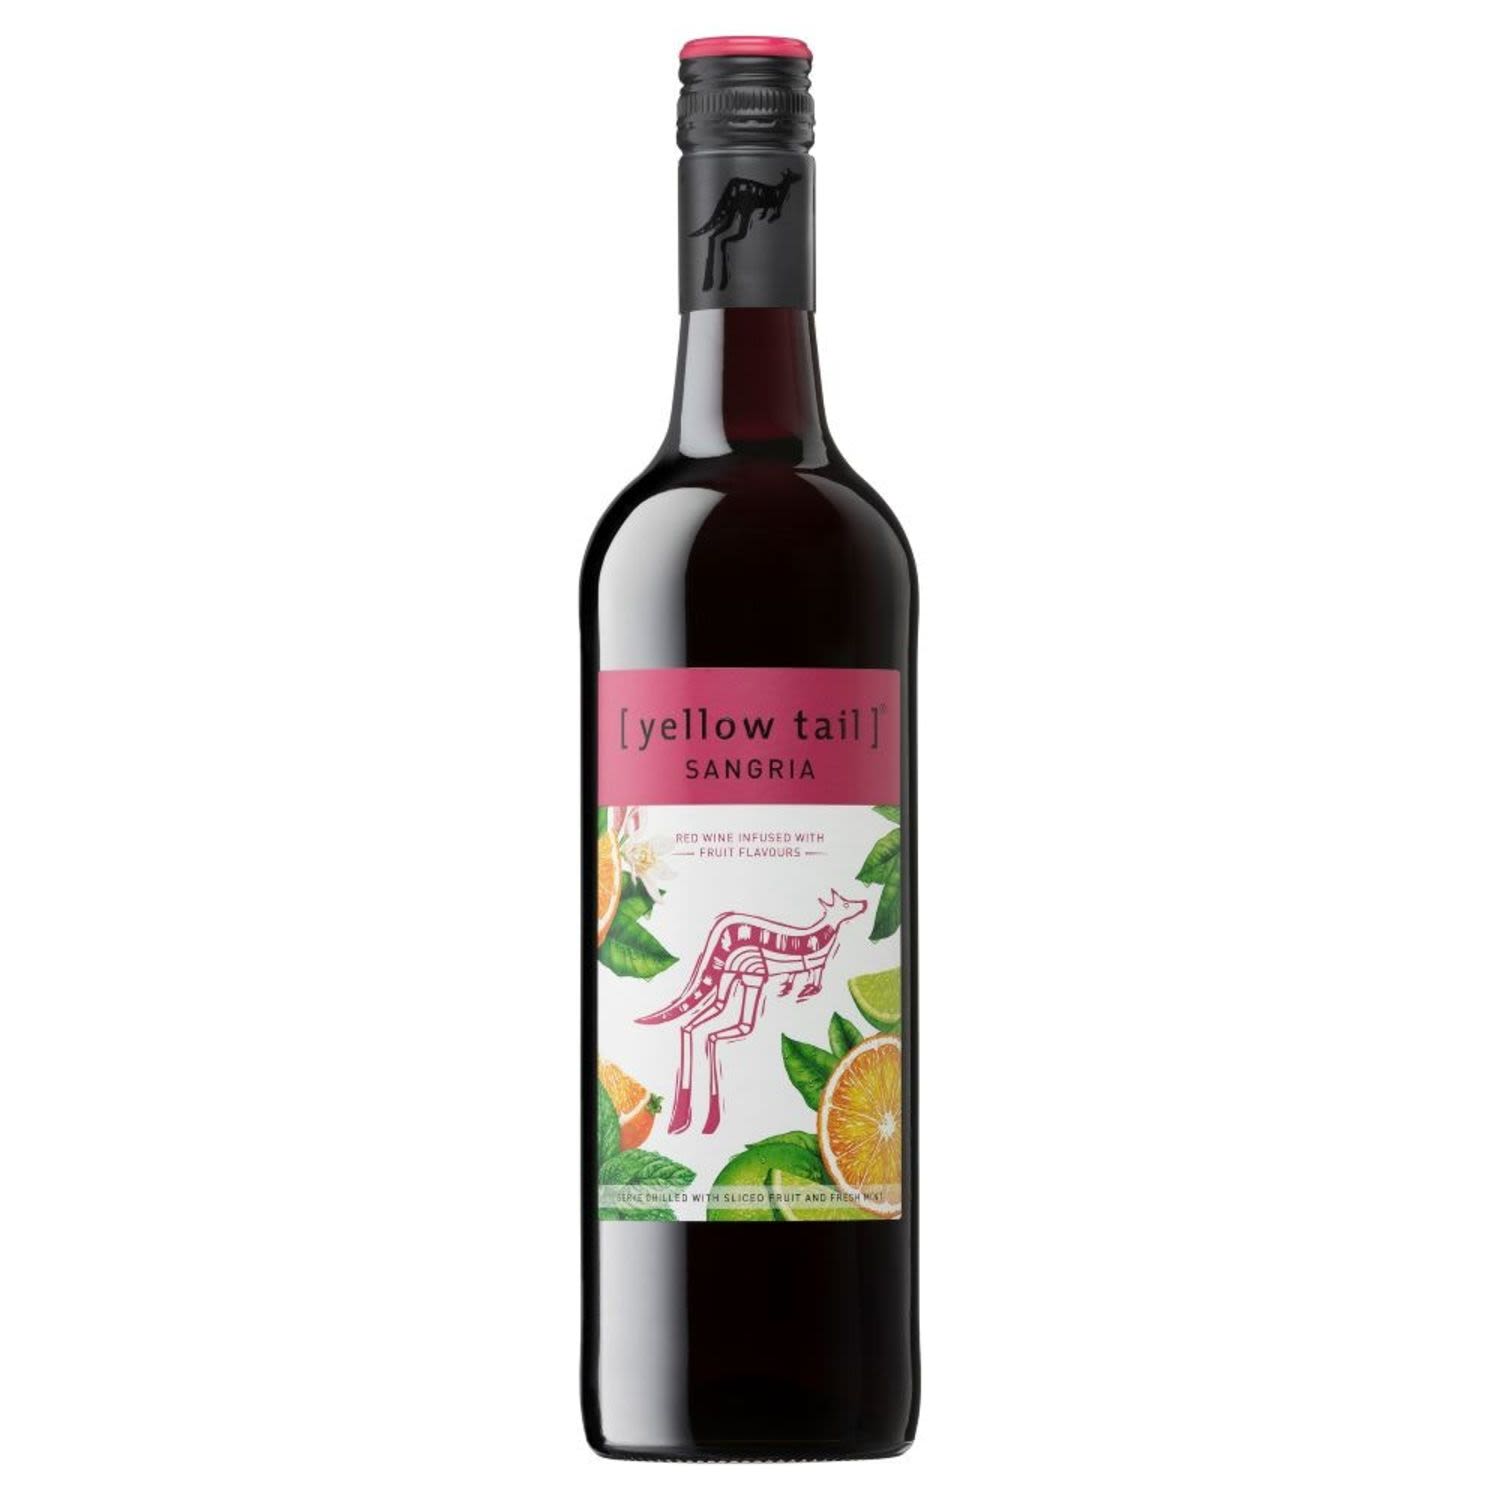 A full flavour mix of citrus partnered with little notes of red ripe fruit which gauges the senses and compliments the wine bouquet allowing for a harmonious partnership between both citrus and red fruits.<br /> <br />Alcohol Volume: 12.00%<br /><br />Pack Format: Bottle<br /><br />Standard Drinks: 6.8</br /><br />Pack Type: Bottle<br /><br />Country of Origin: Australia<br /><br />Region: South Eastern Australia<br /><br />Vintage: NV<br />